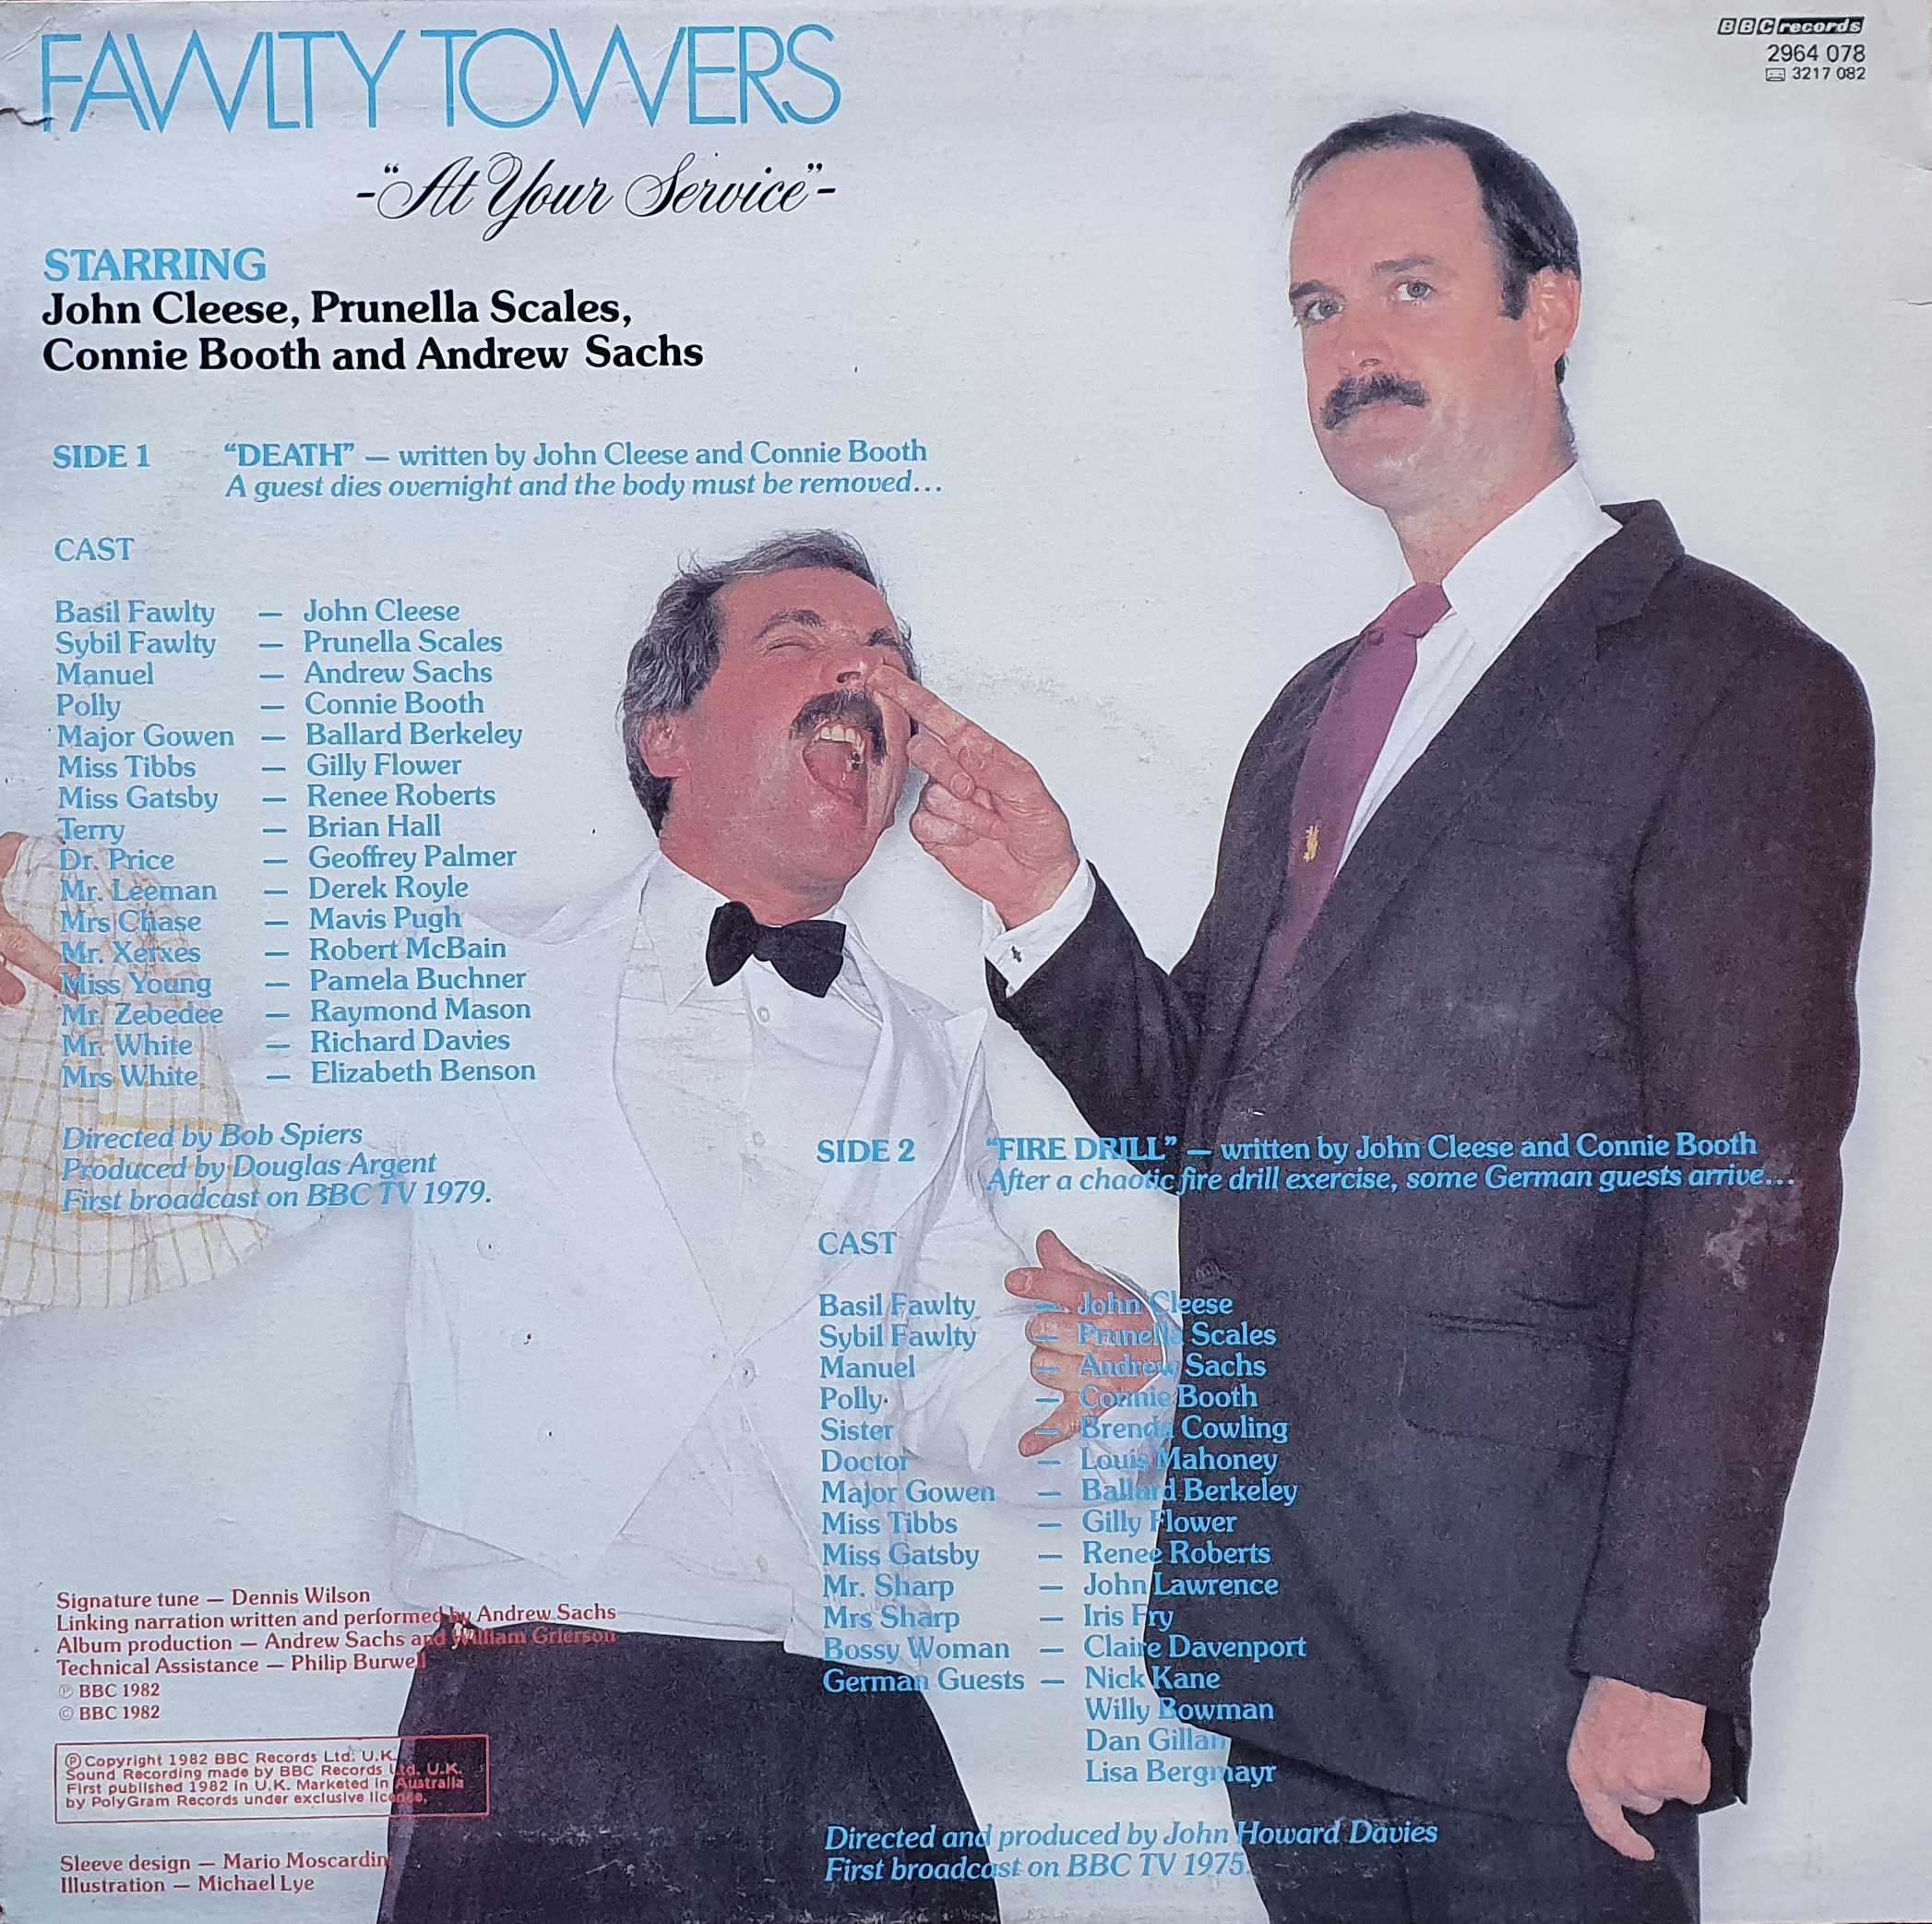 Picture of 2964 078 Fawlty Towers - At your service by artist John Cleese / Connie Booth from the BBC records and Tapes library